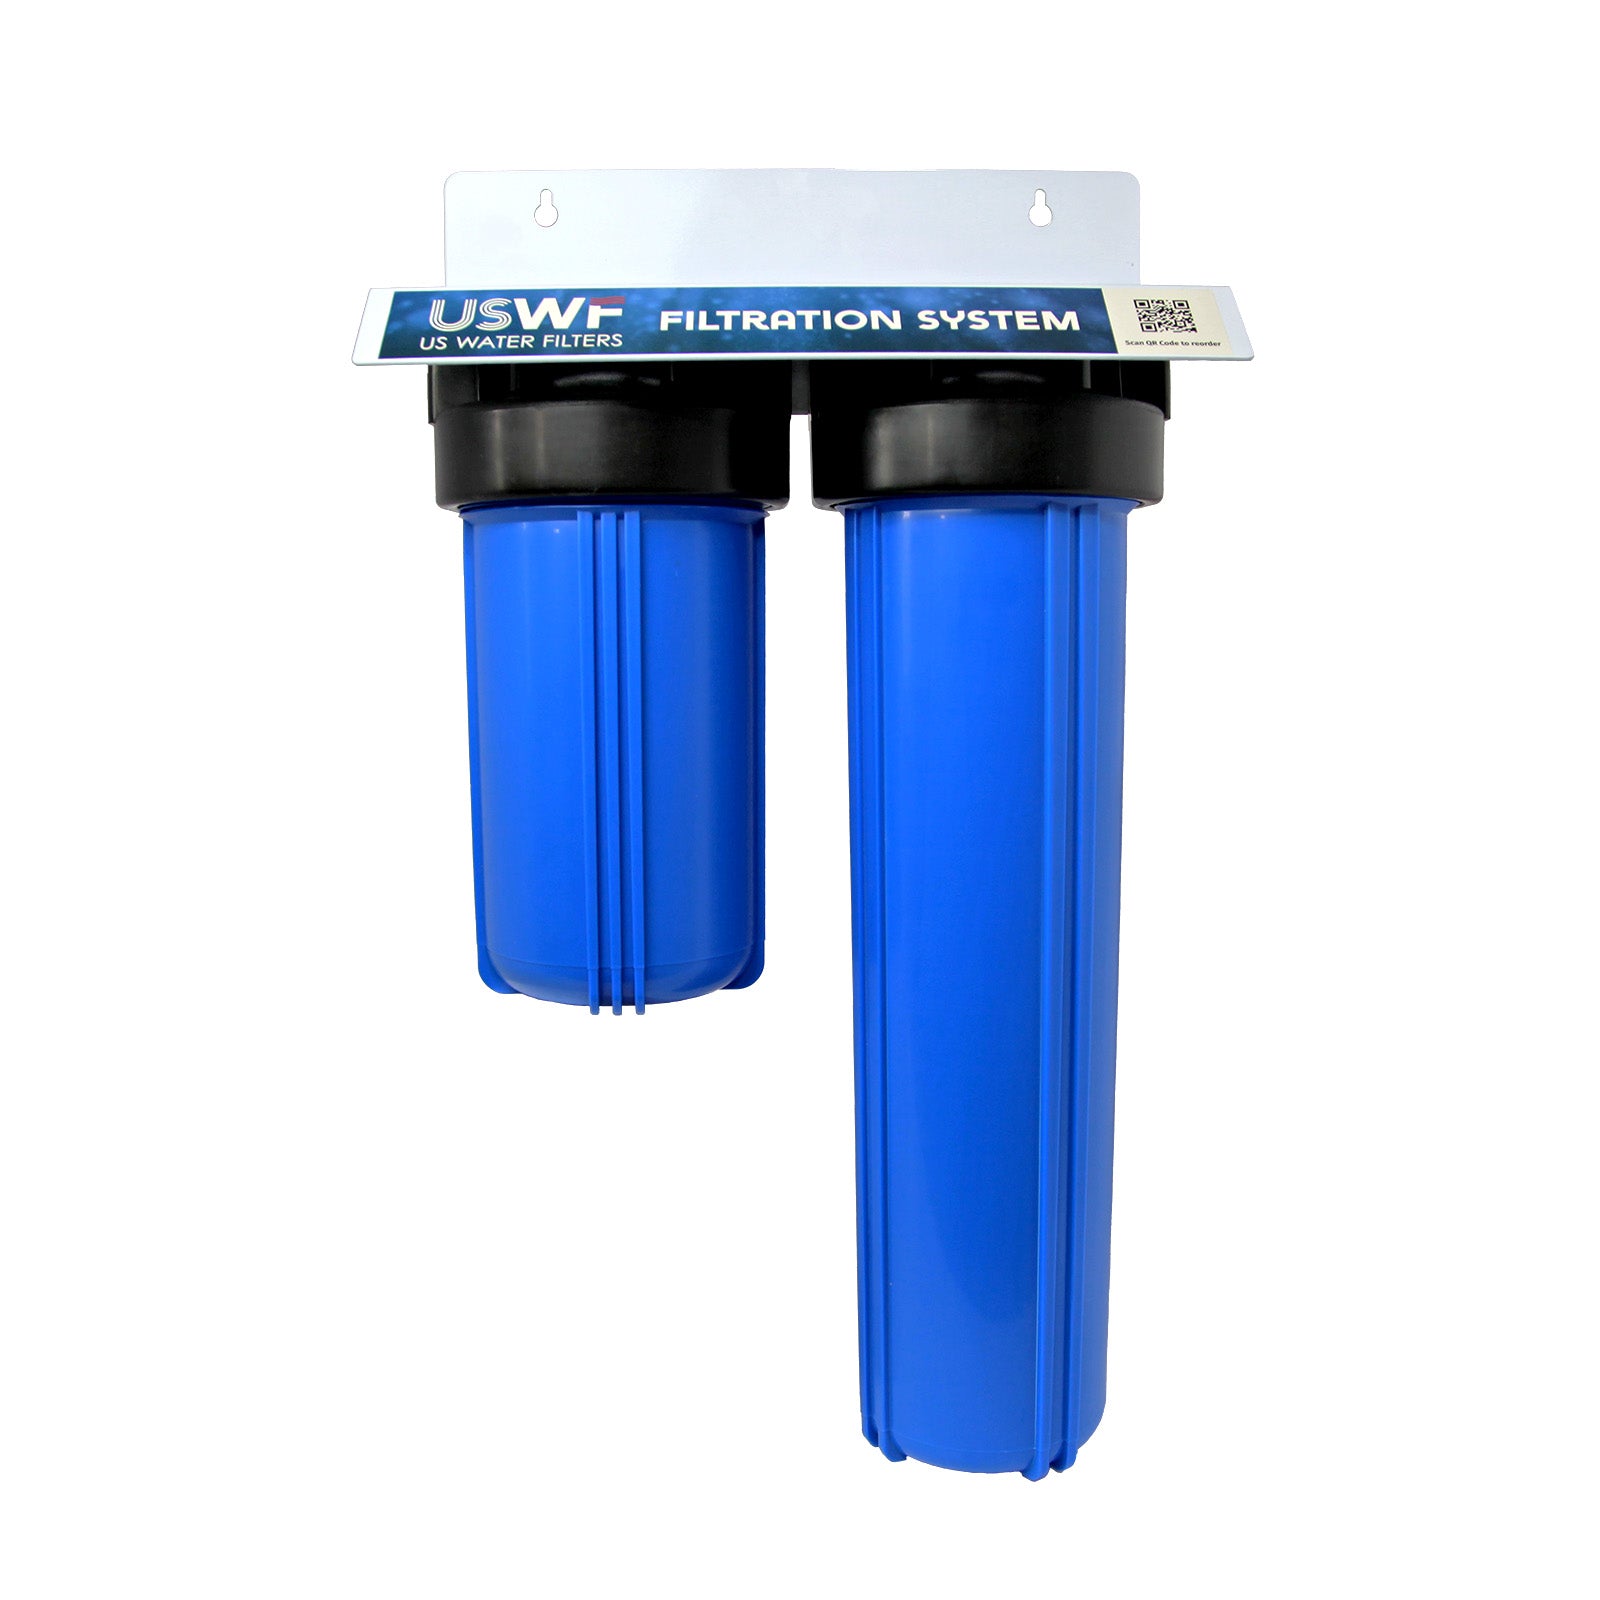 Two-Stage Big Blue 4.5"x10" & 20"  Filter Housing by USWF, 3/4" Inlet/Outlet, w/mounting bracket & wrench